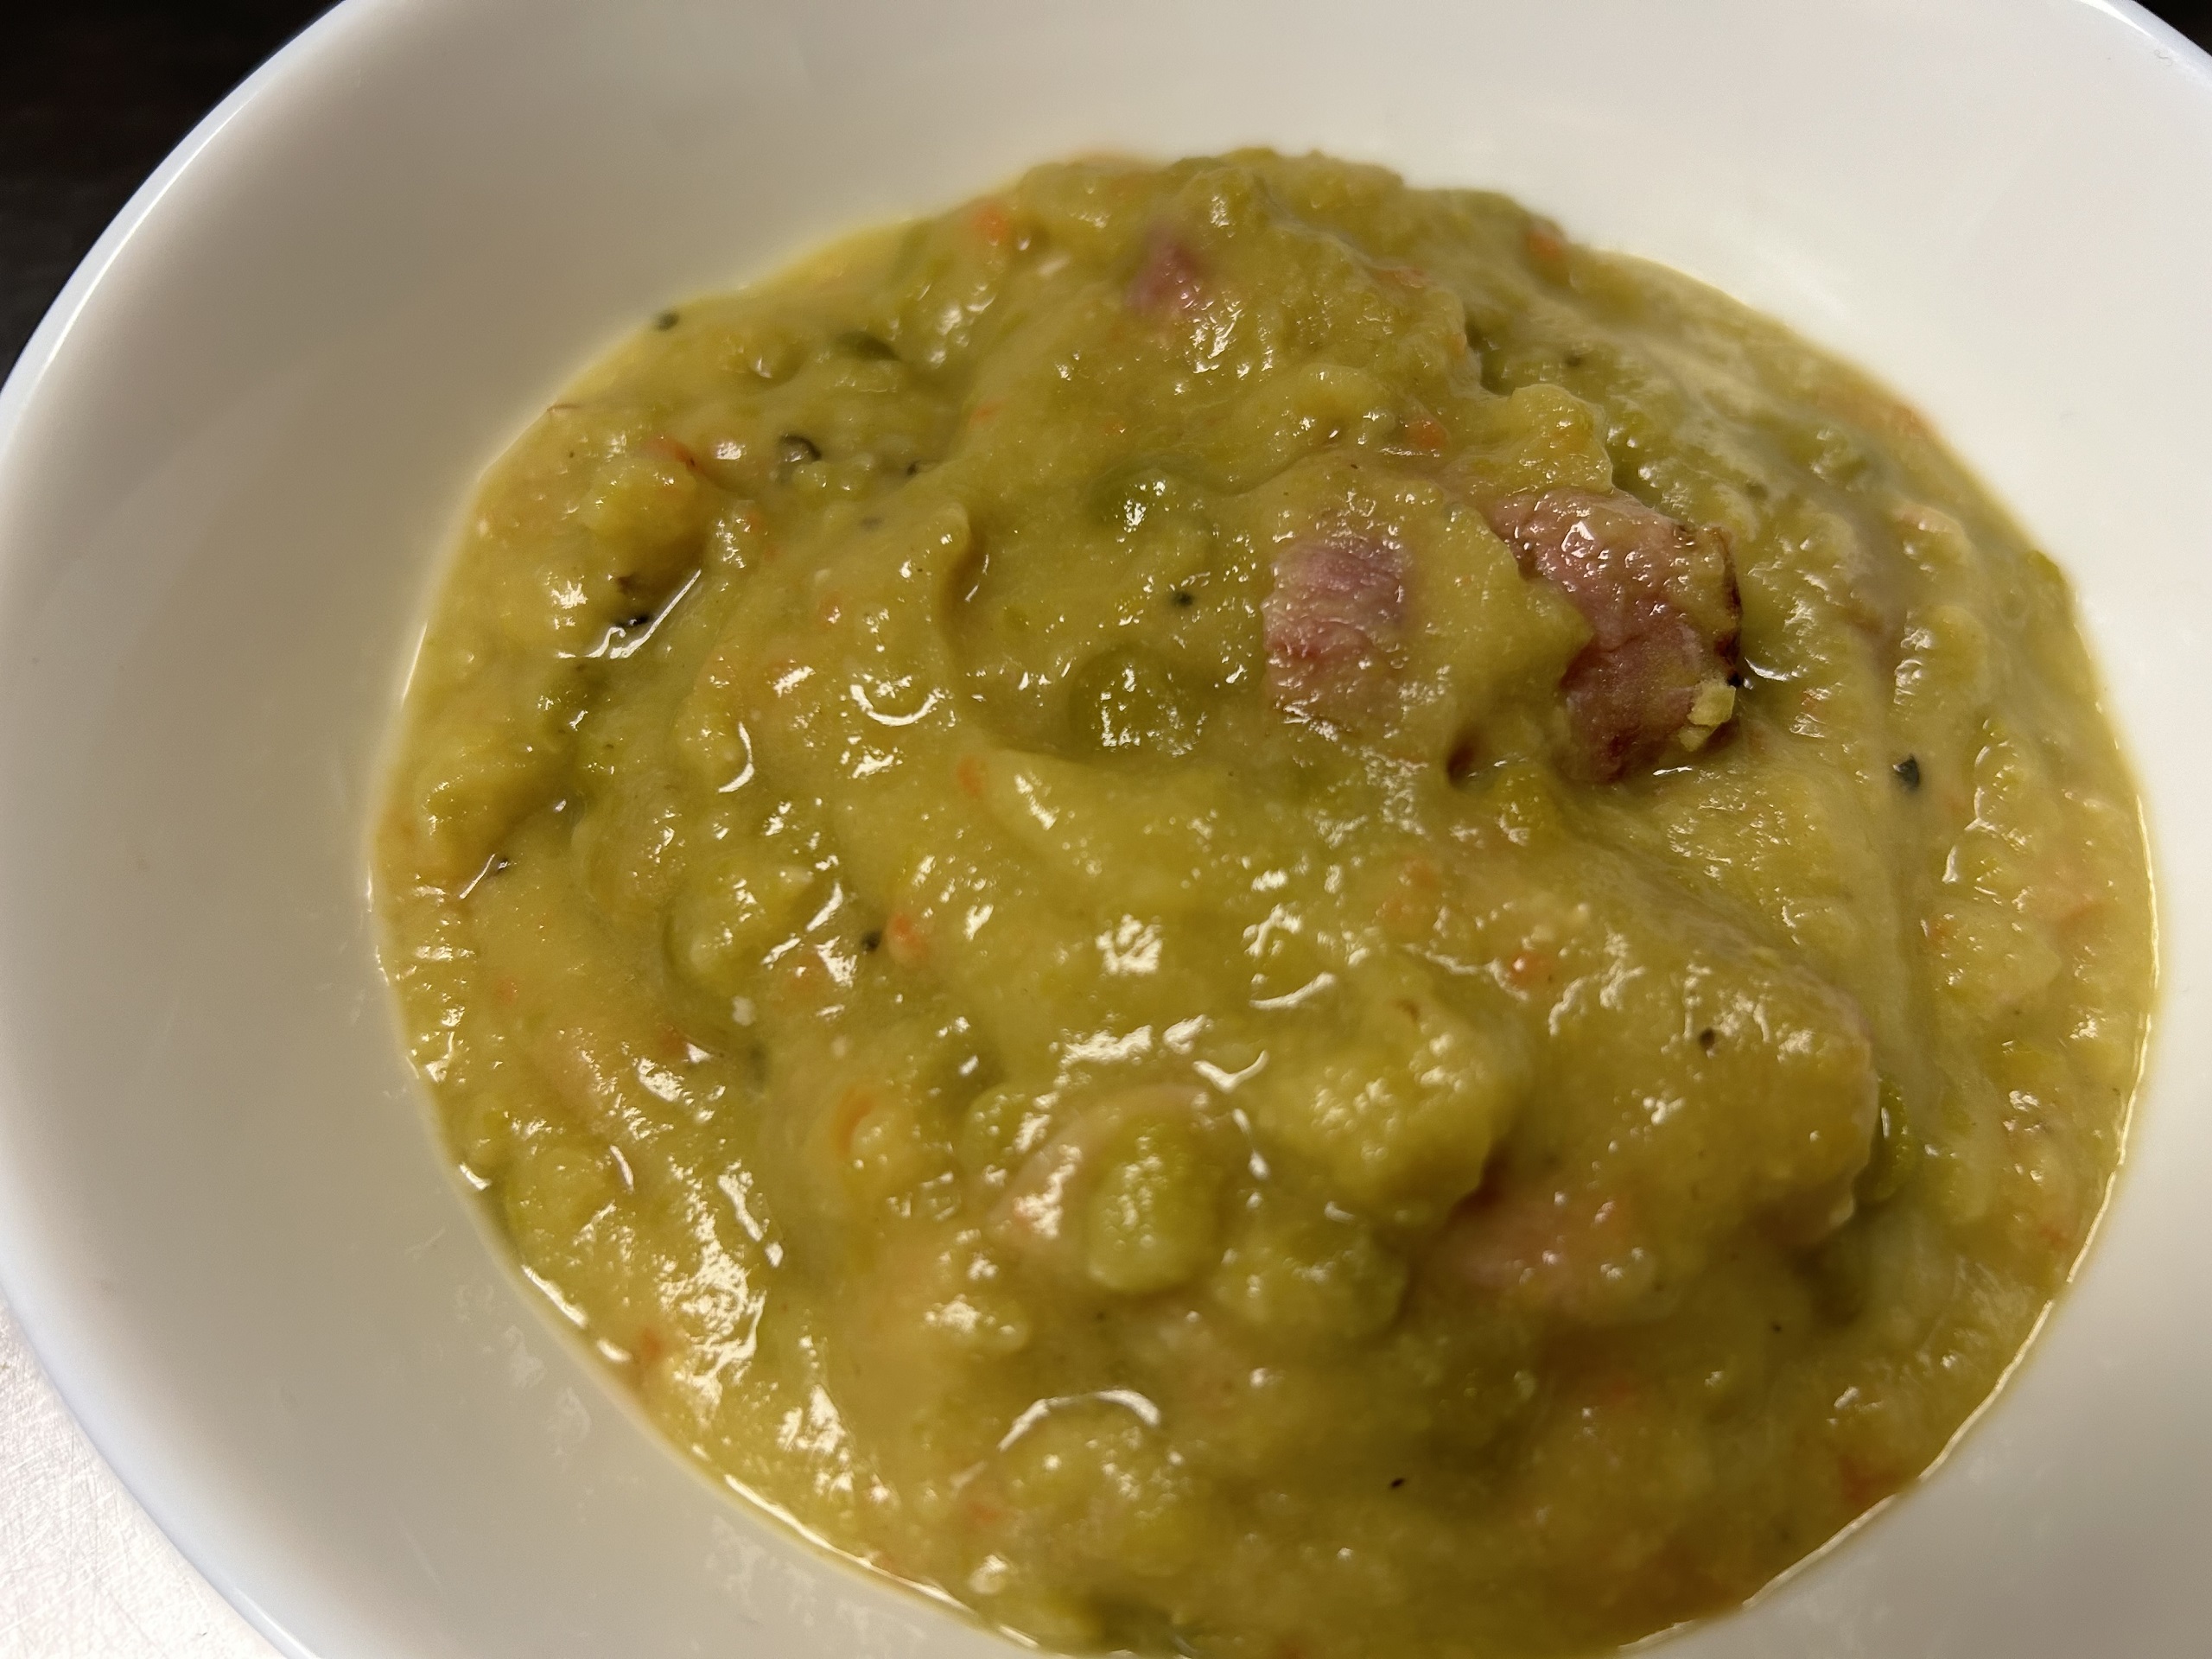 Kat's Creamy Split Pea Soup with Ham in a white bowl where you see the mushy peas, veggies, and pepper seasoning plus chunks of Polish ham meat.